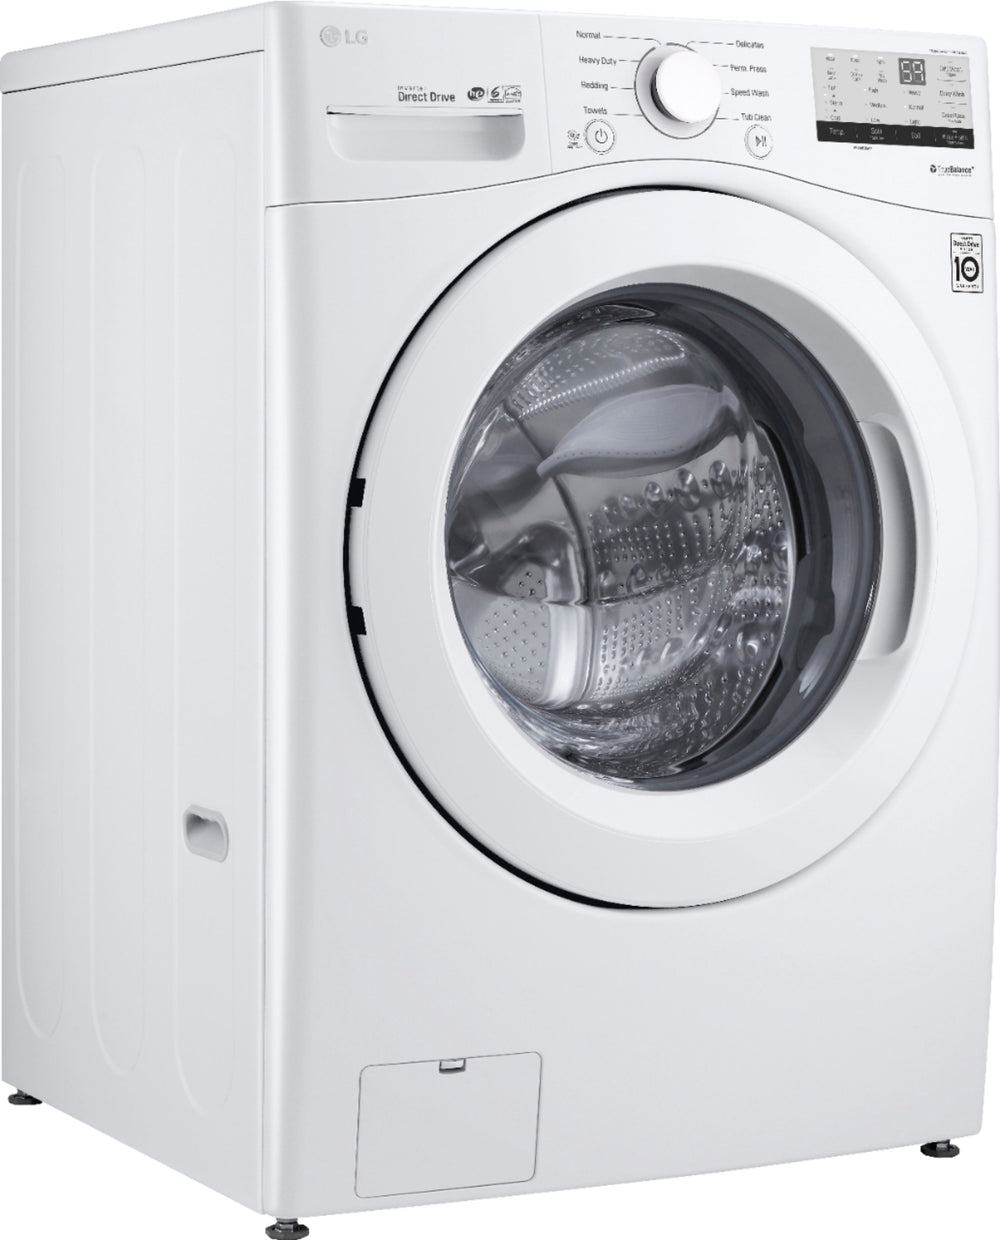 LG - 4.5 Cu. Ft. High Efficiency Stackable Front-Load Washer with 6Motion Technology - White_1